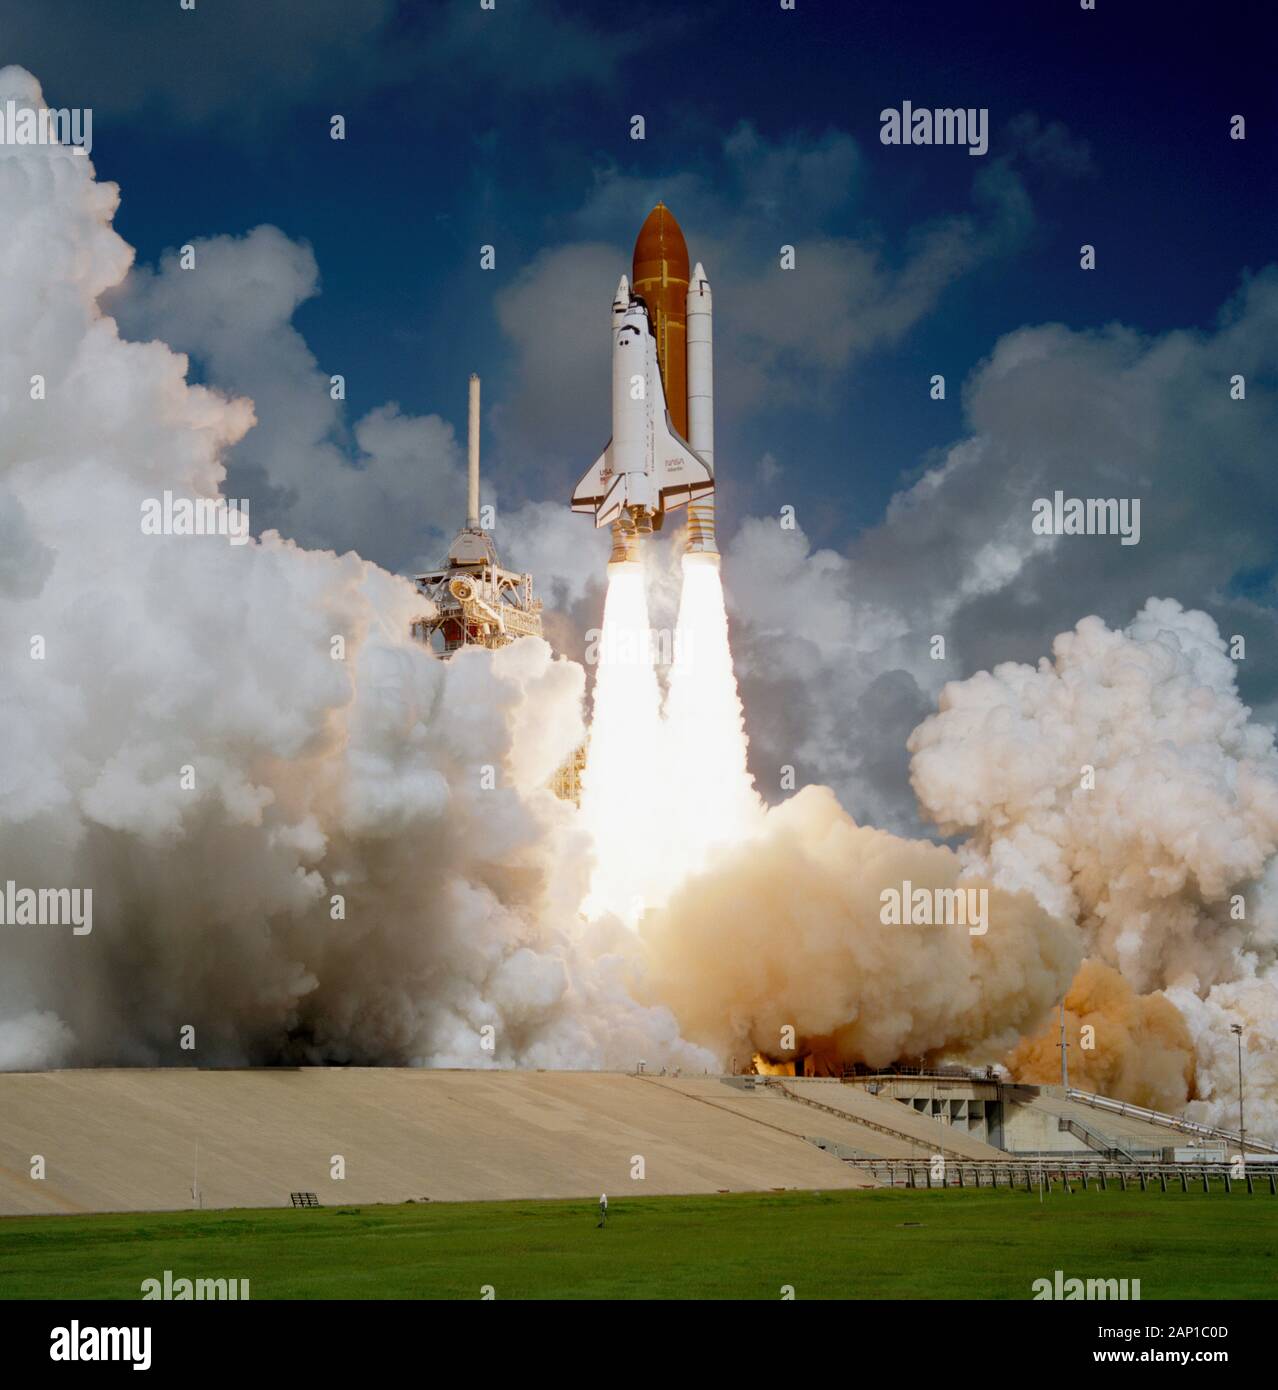 KENNEDY SPACE CENTER, USA - 3 Oct 1985 - 1st Flight of Atlantis – The space shuttle Atlantis, mission STS-51J, launches on its maiden voyage from NASA Stock Photo